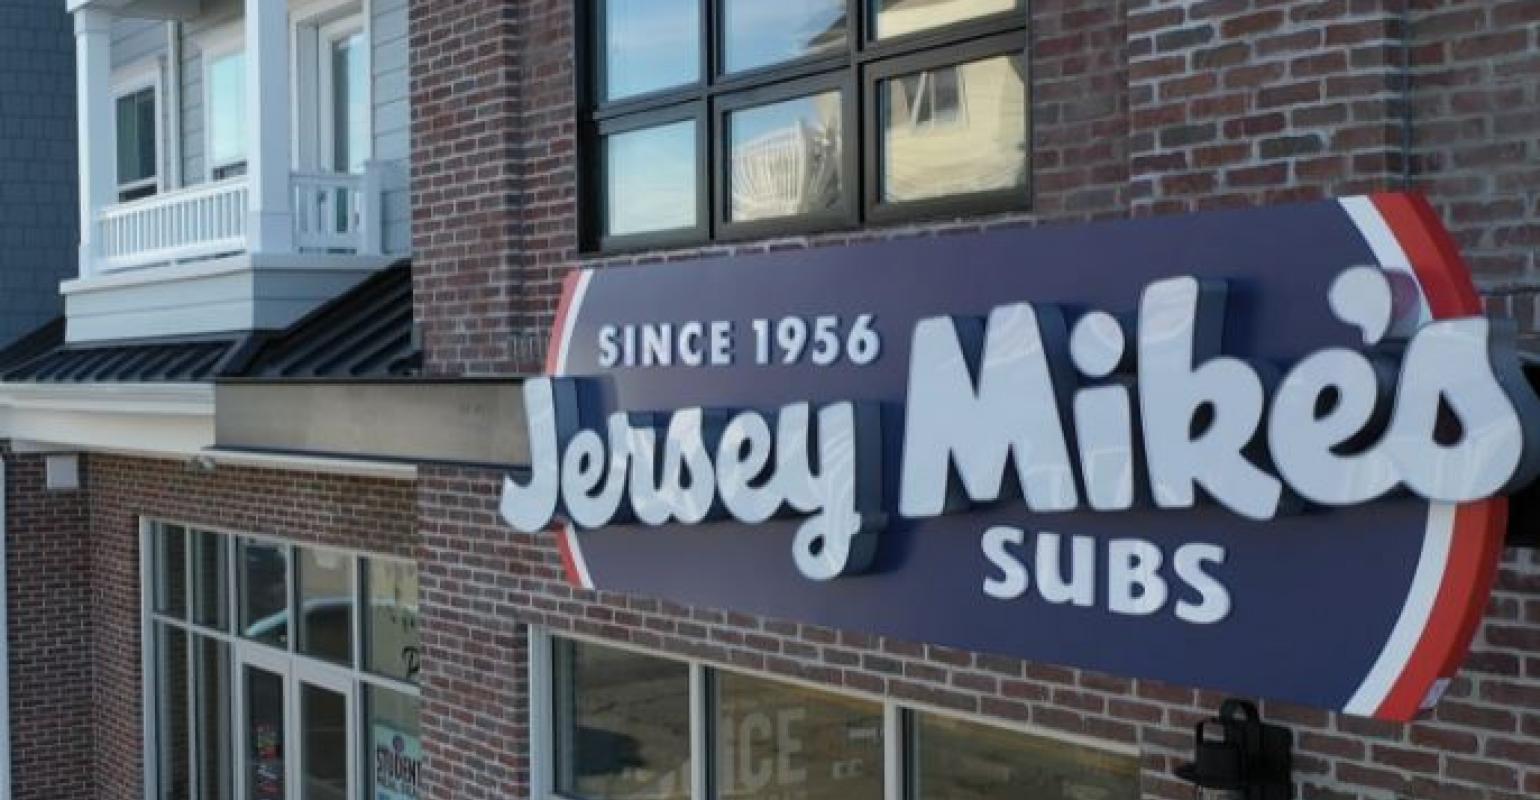 Jersey Mike's Franchise: $2.2 BILLION IN SALES? 🔥 